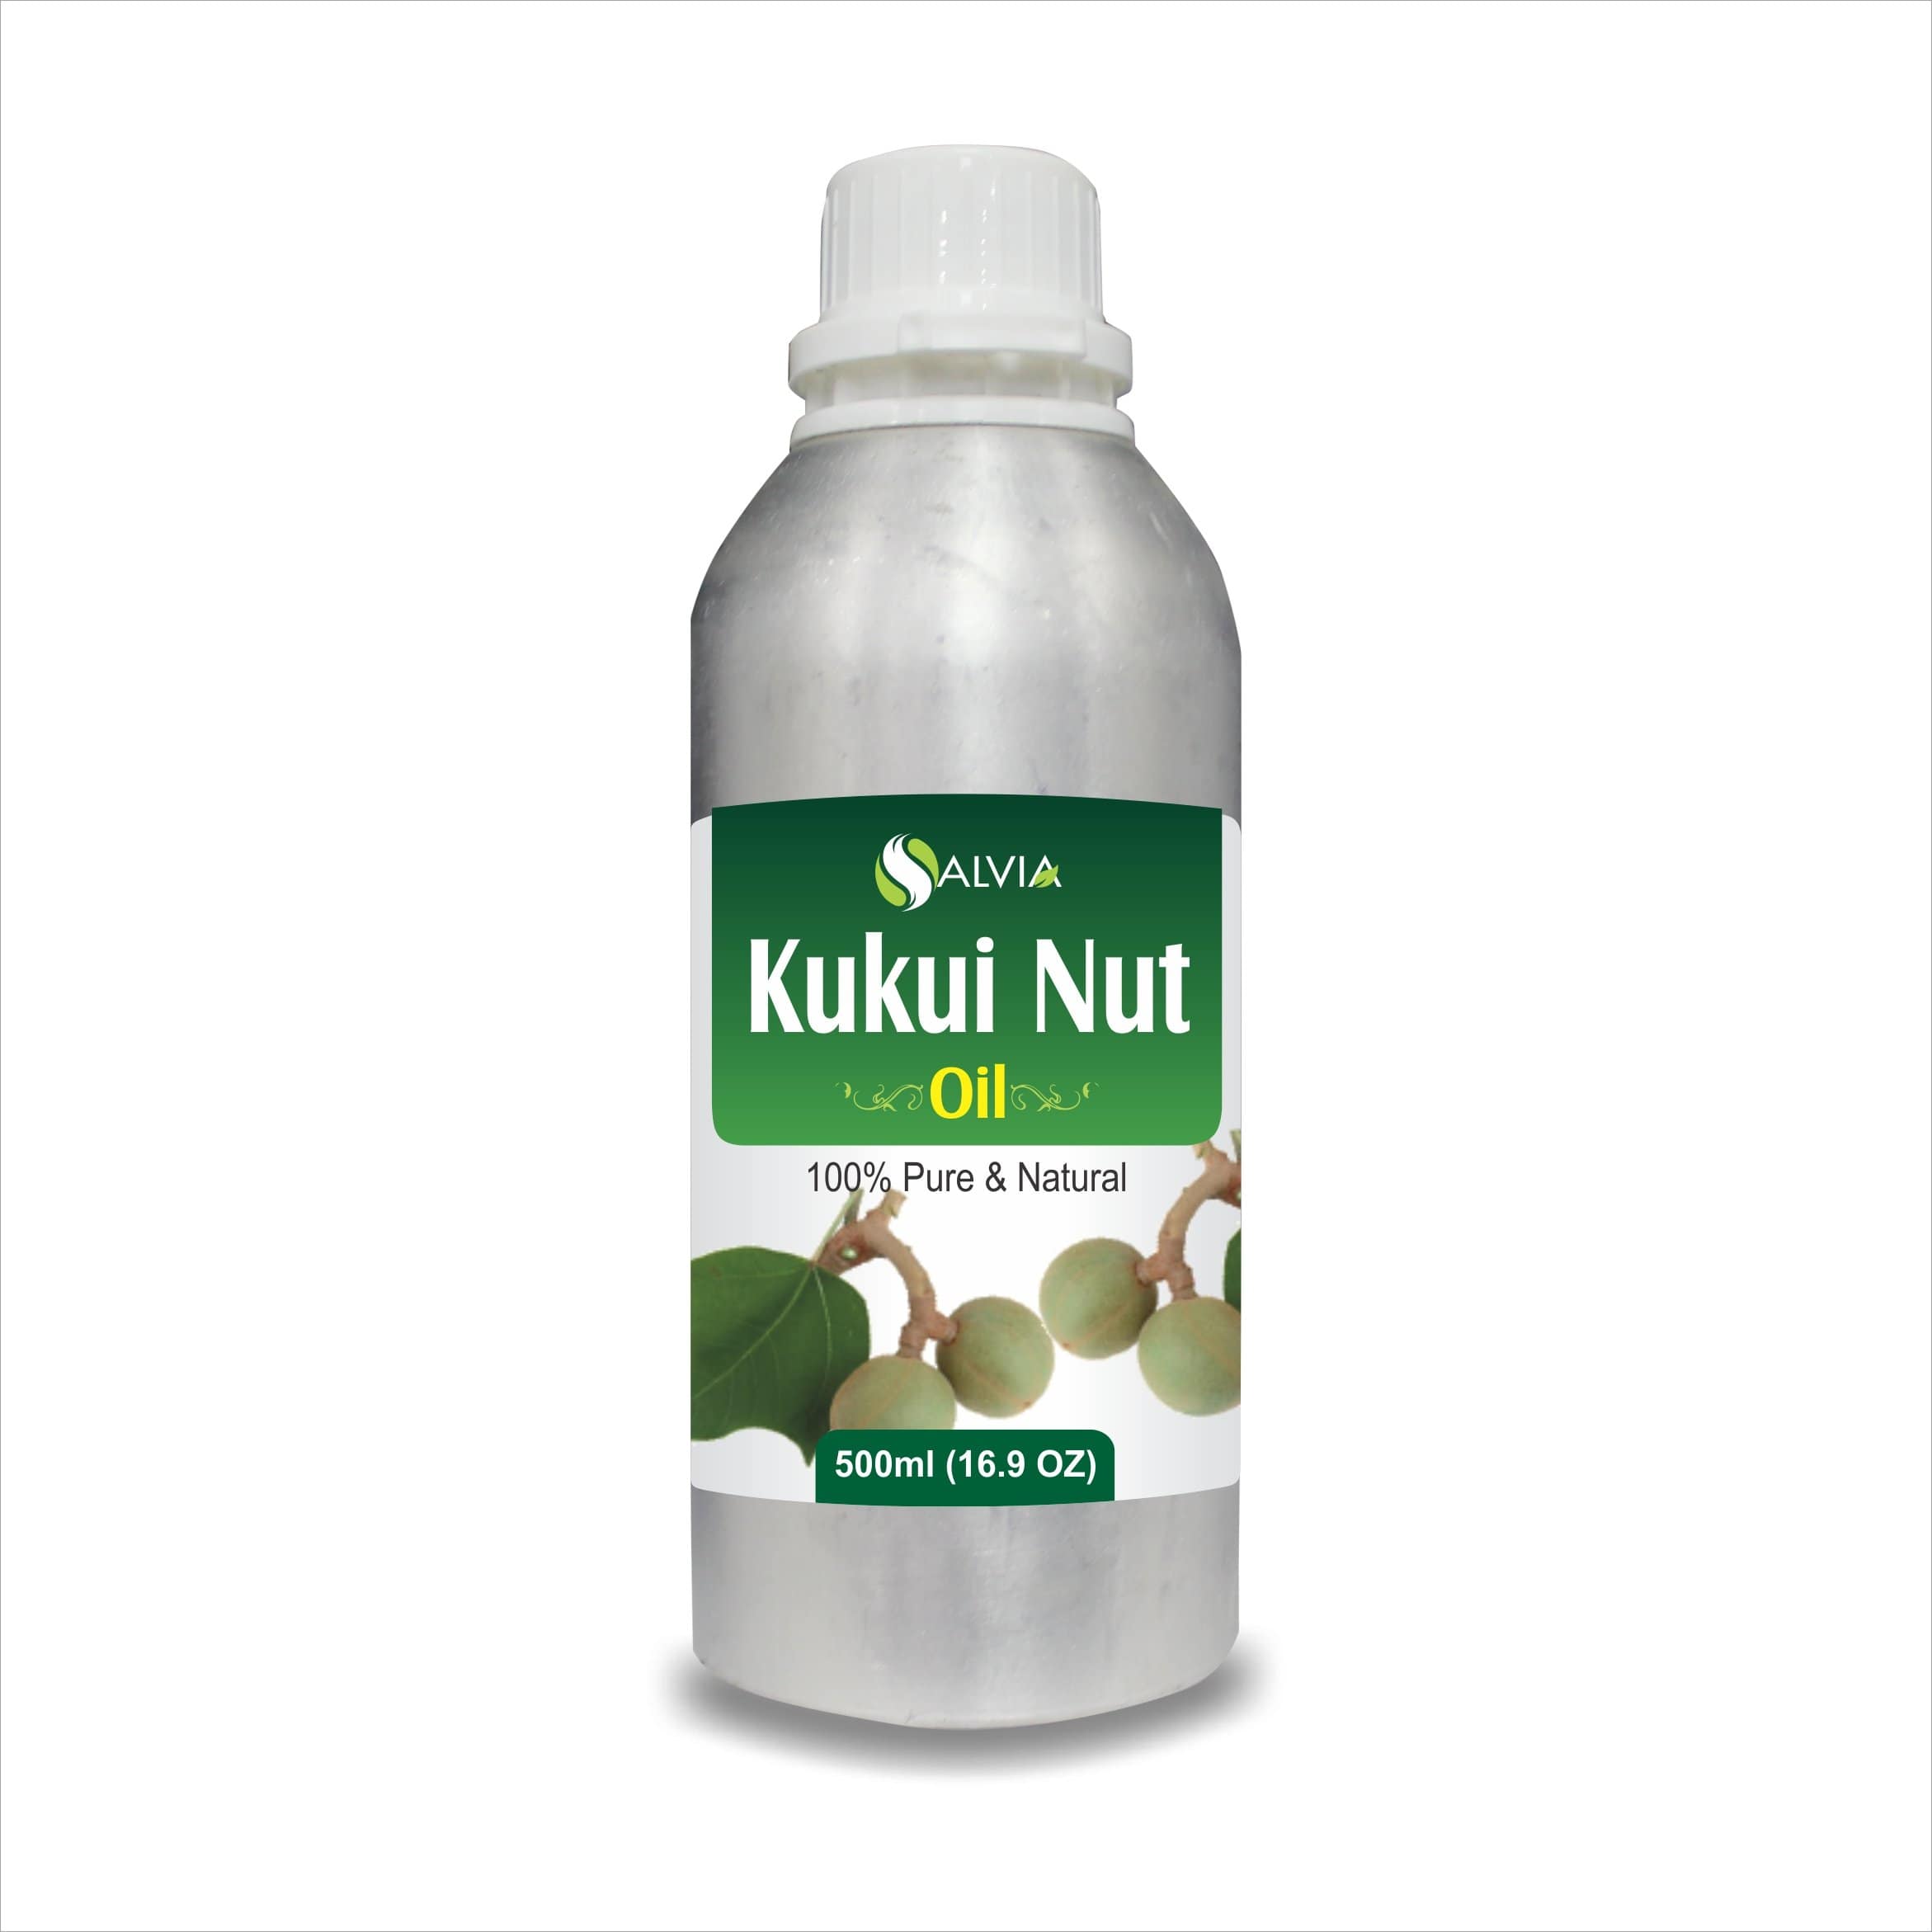 Salvia Natural Carrier Oils,Anti Ageing,Anti-ageing Oil 500ml Kukui Nut (Aleurites Moluccans) Oil 100% Natural Pure Carrier Oil Moistures & Hydrates Skin, Anti-Aging Properties, Collagen Production & More